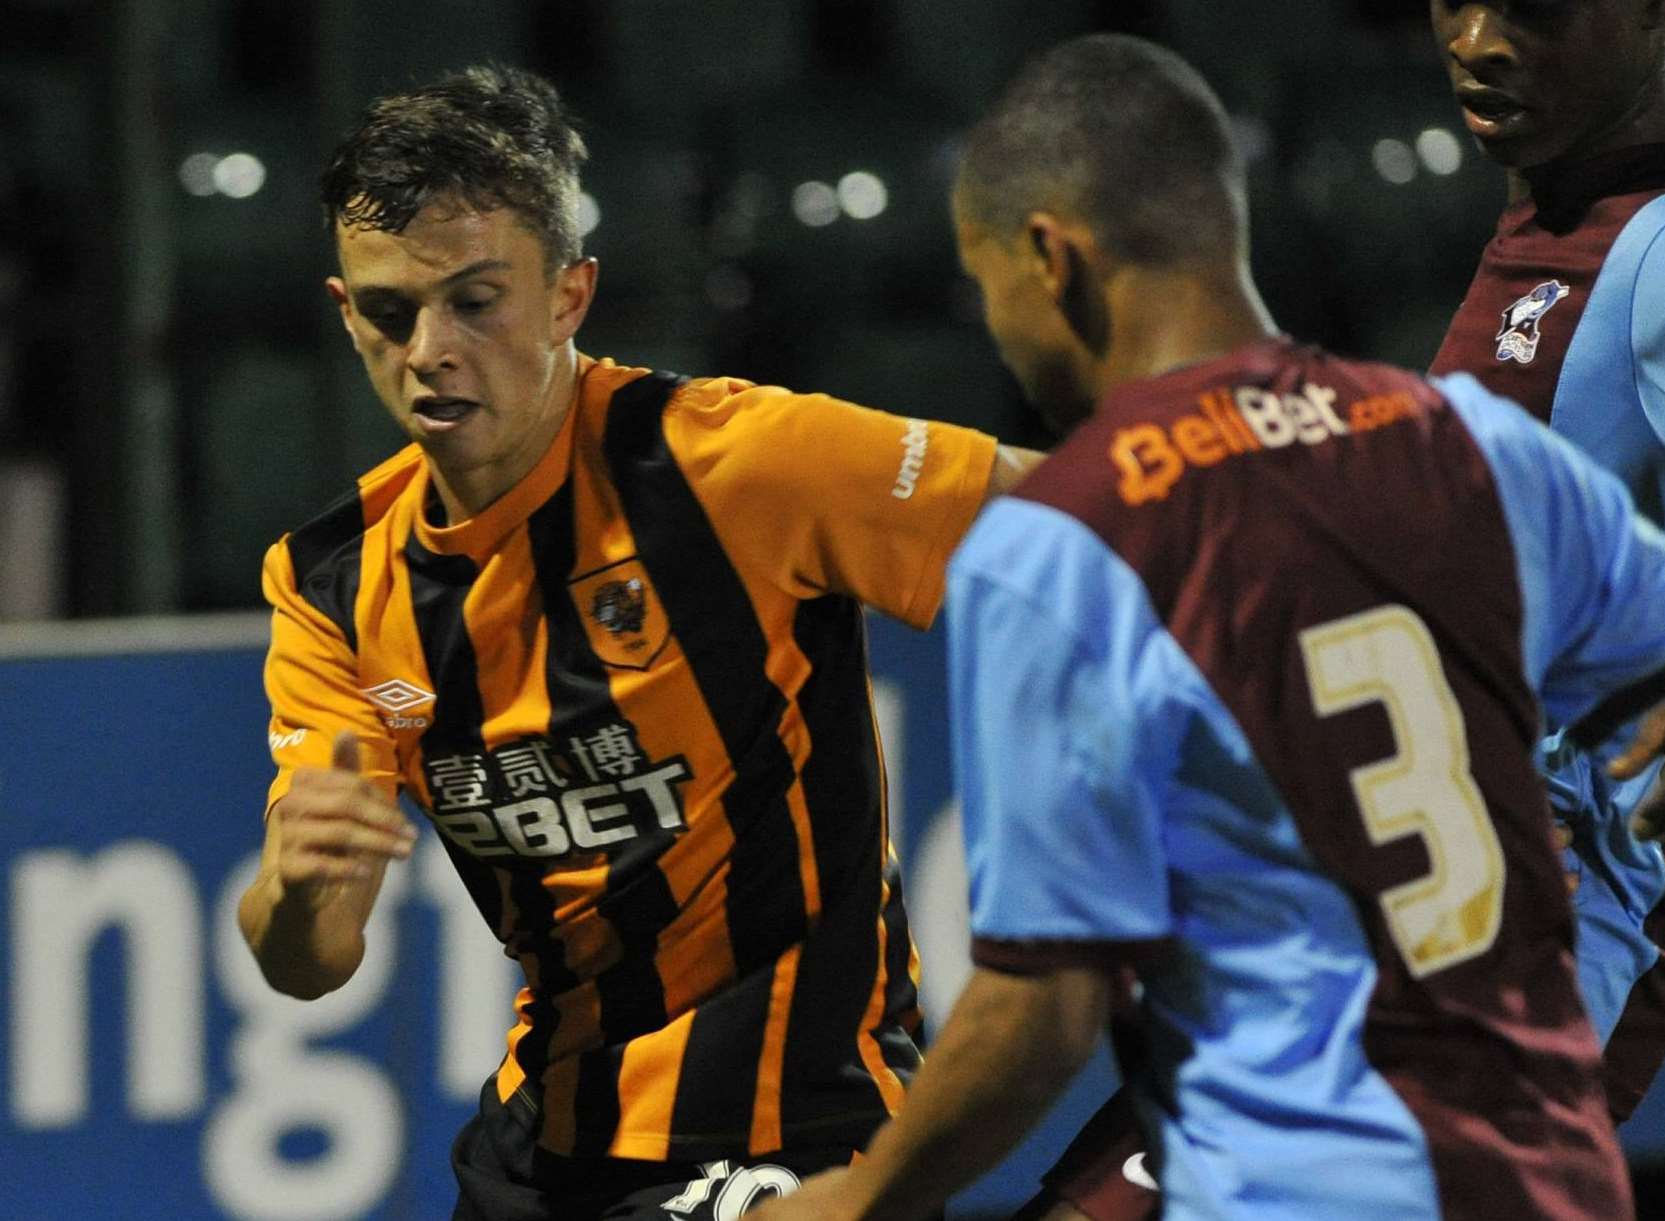 Johan ter Horst in action for Hull City's under-21 side against Scunthorpe